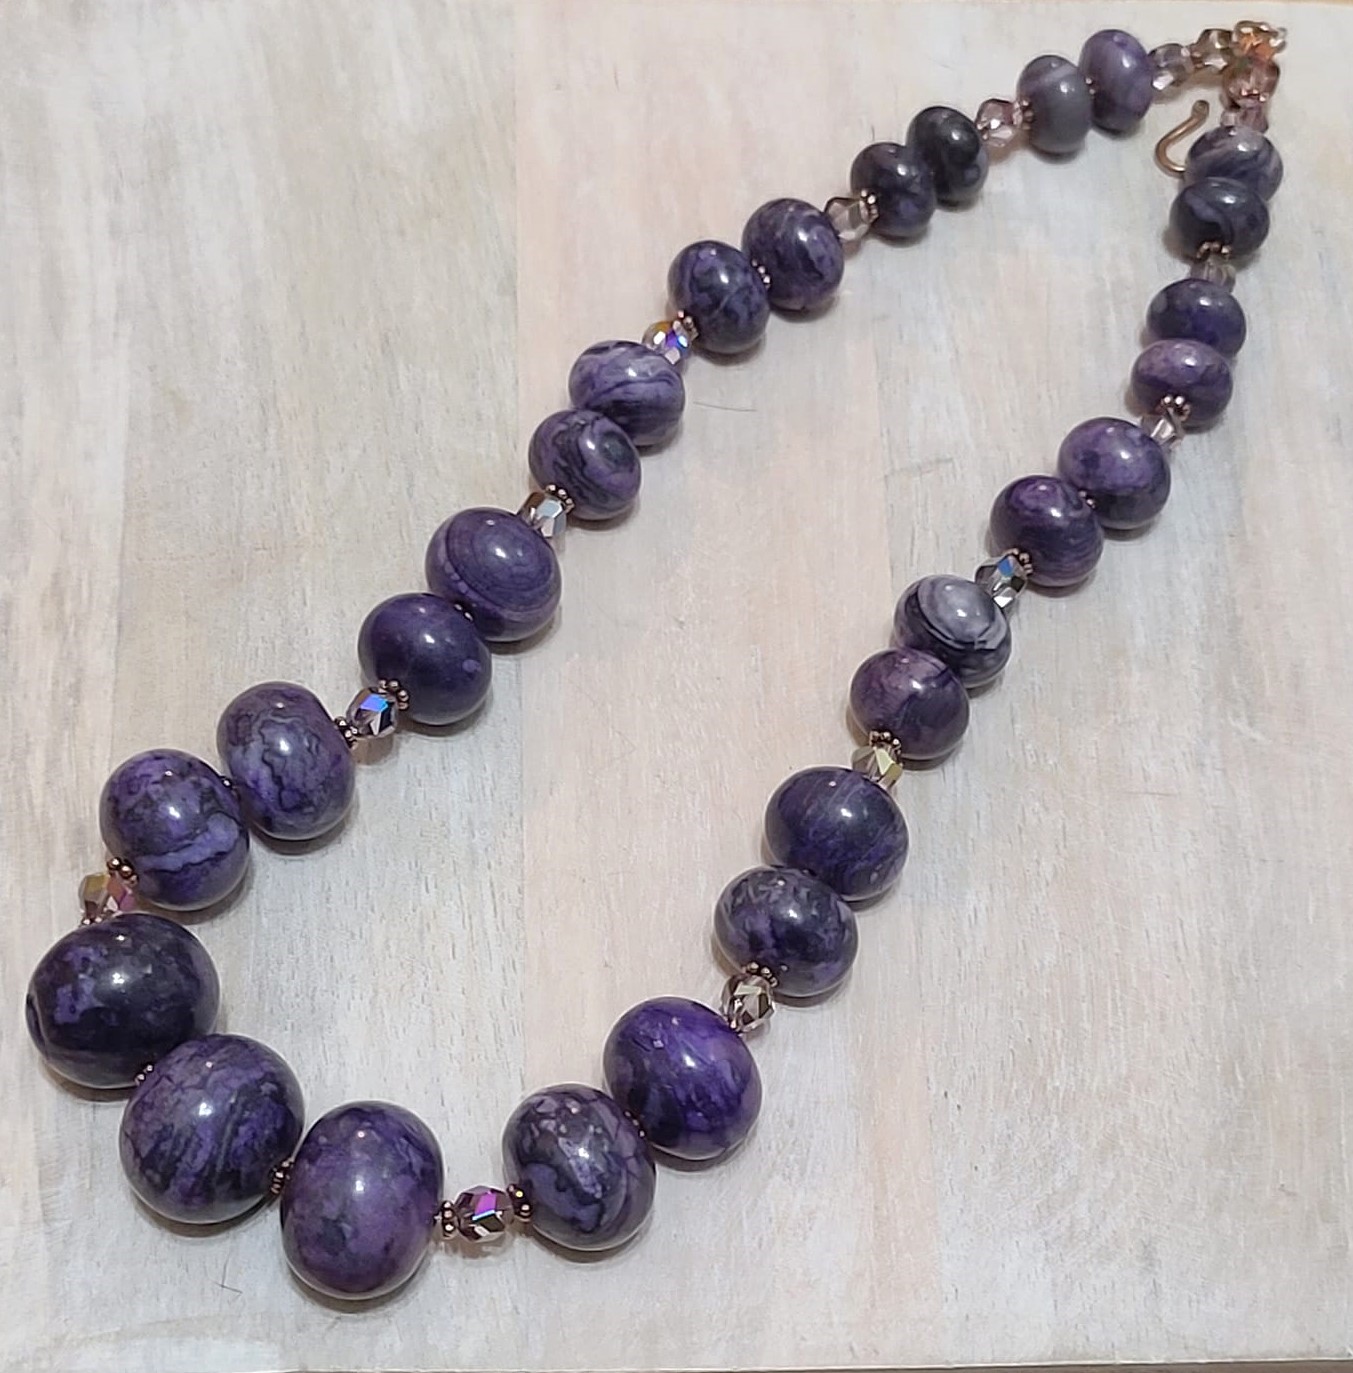 Purple agate gemstone necklace with copper spacers and crystals